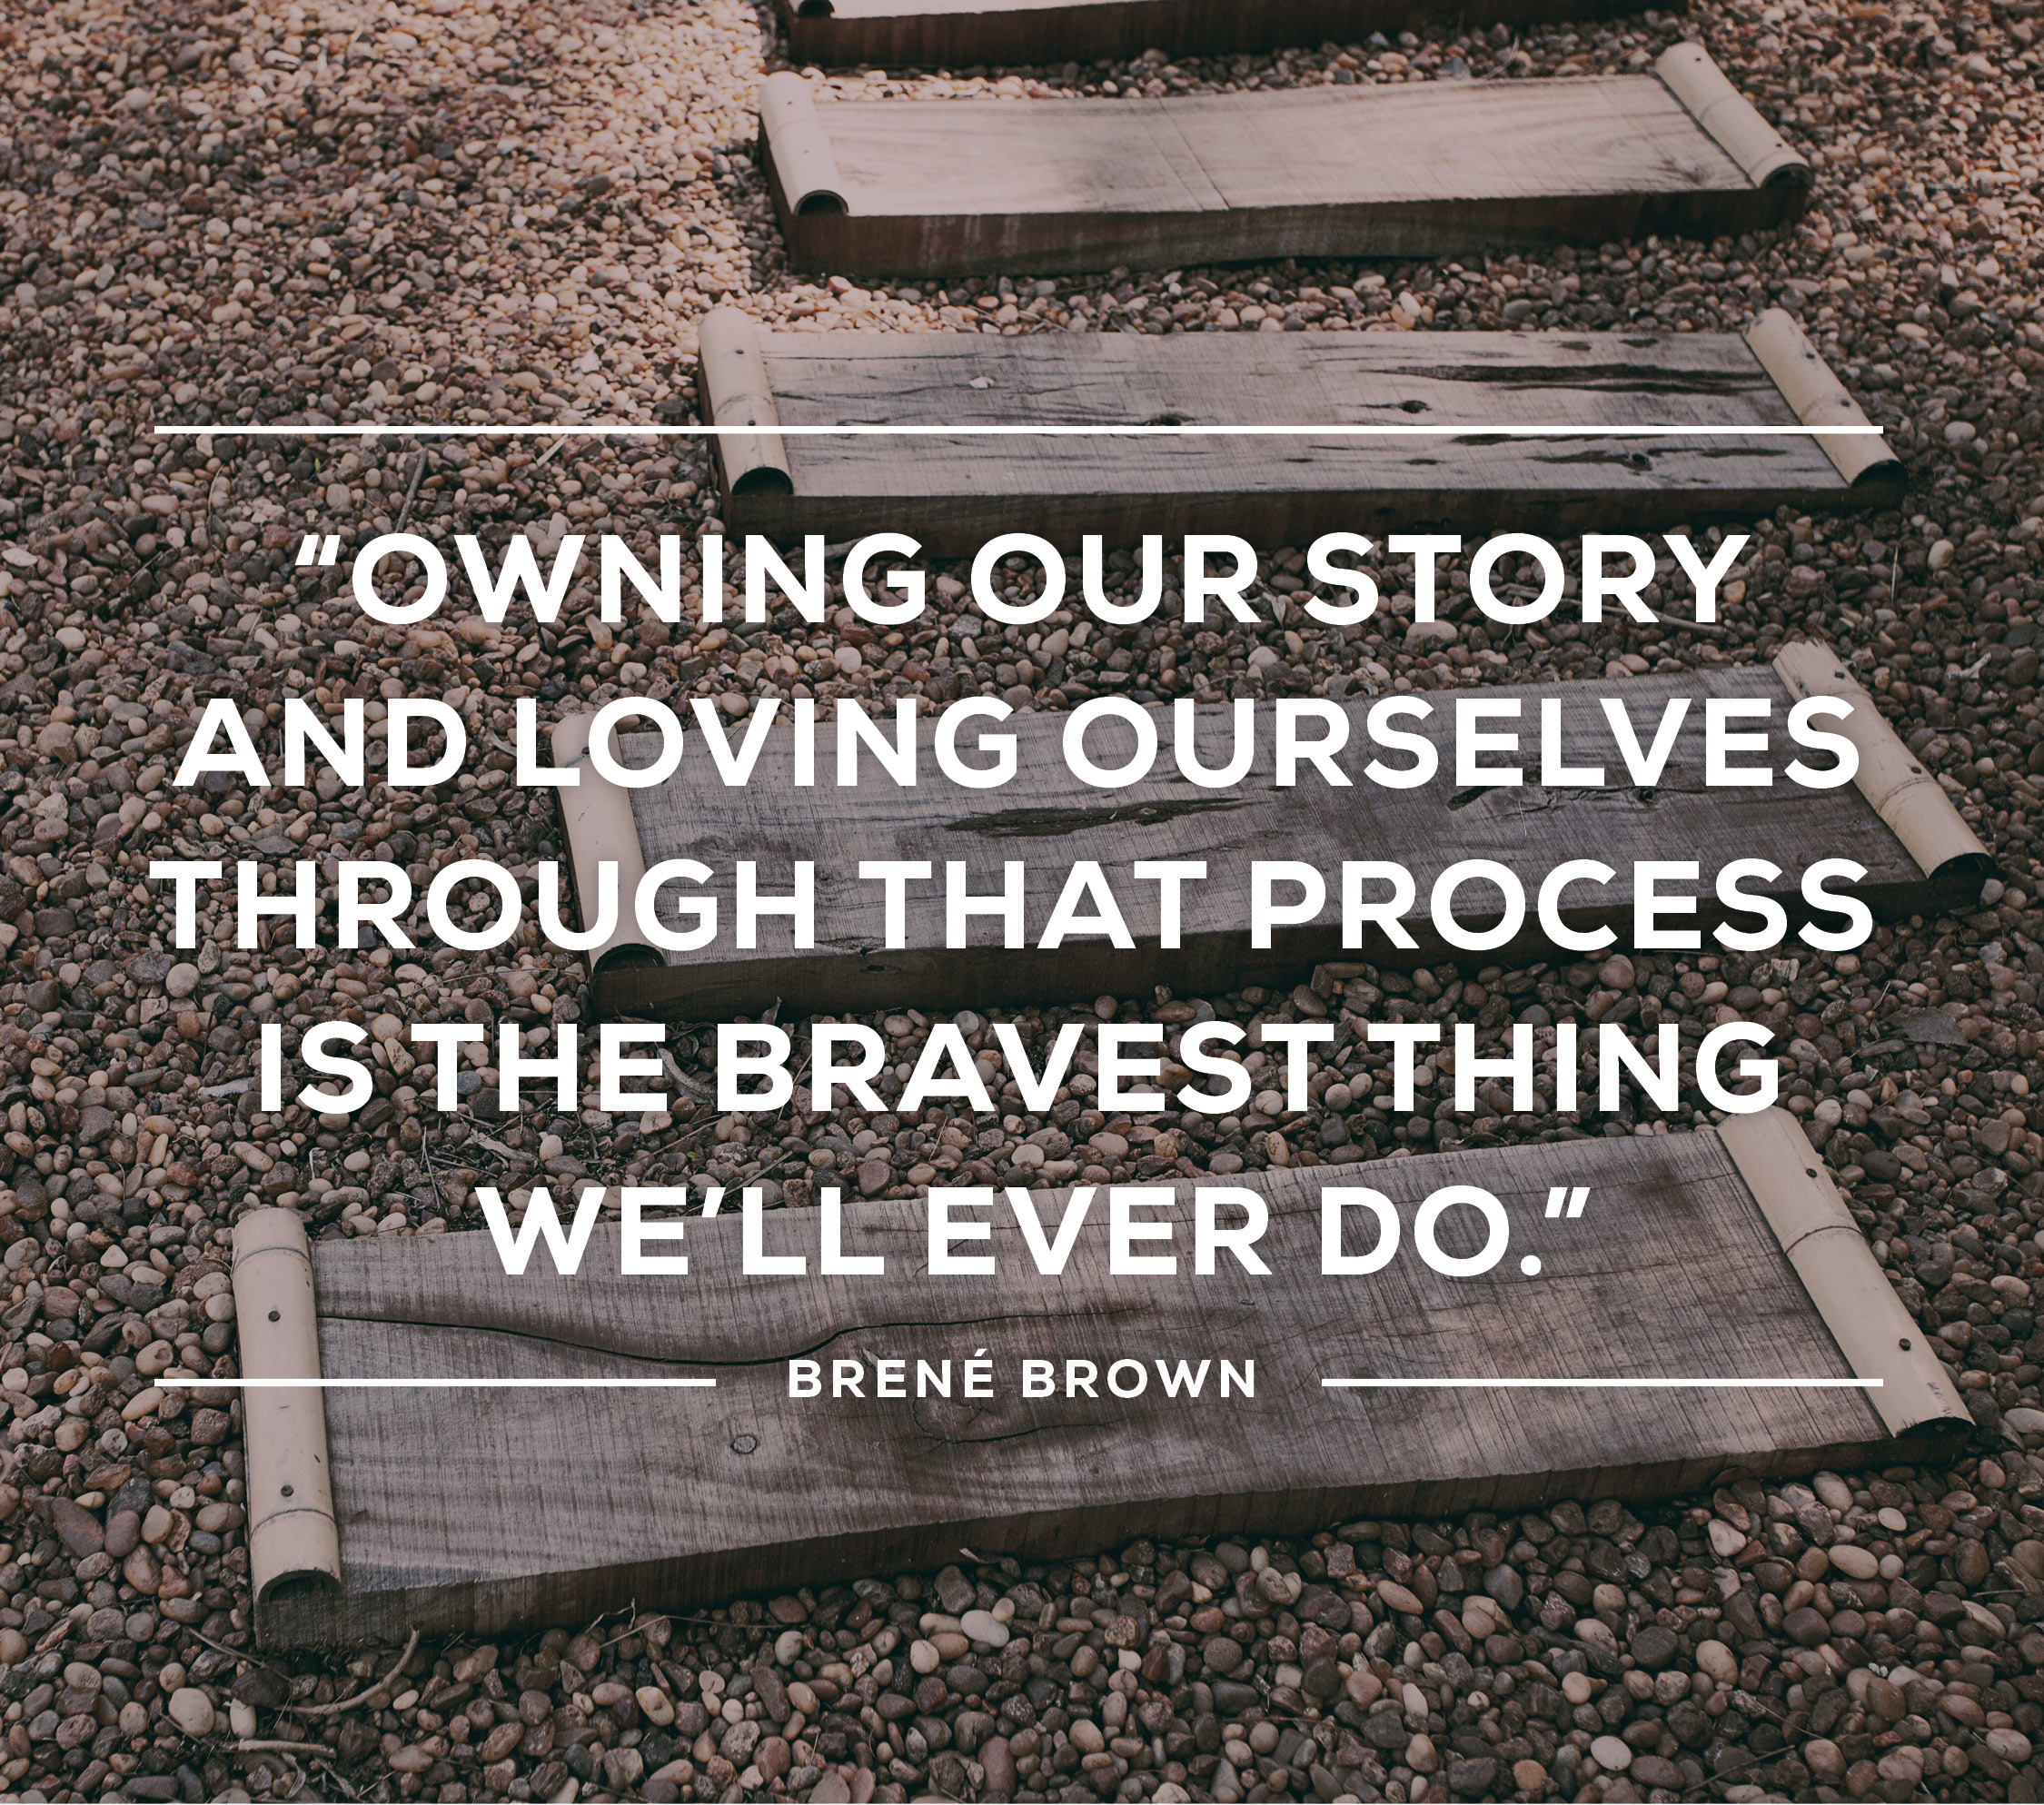 Owning our story and loving ourselves through that process is the bravest thing we'll ever do ~